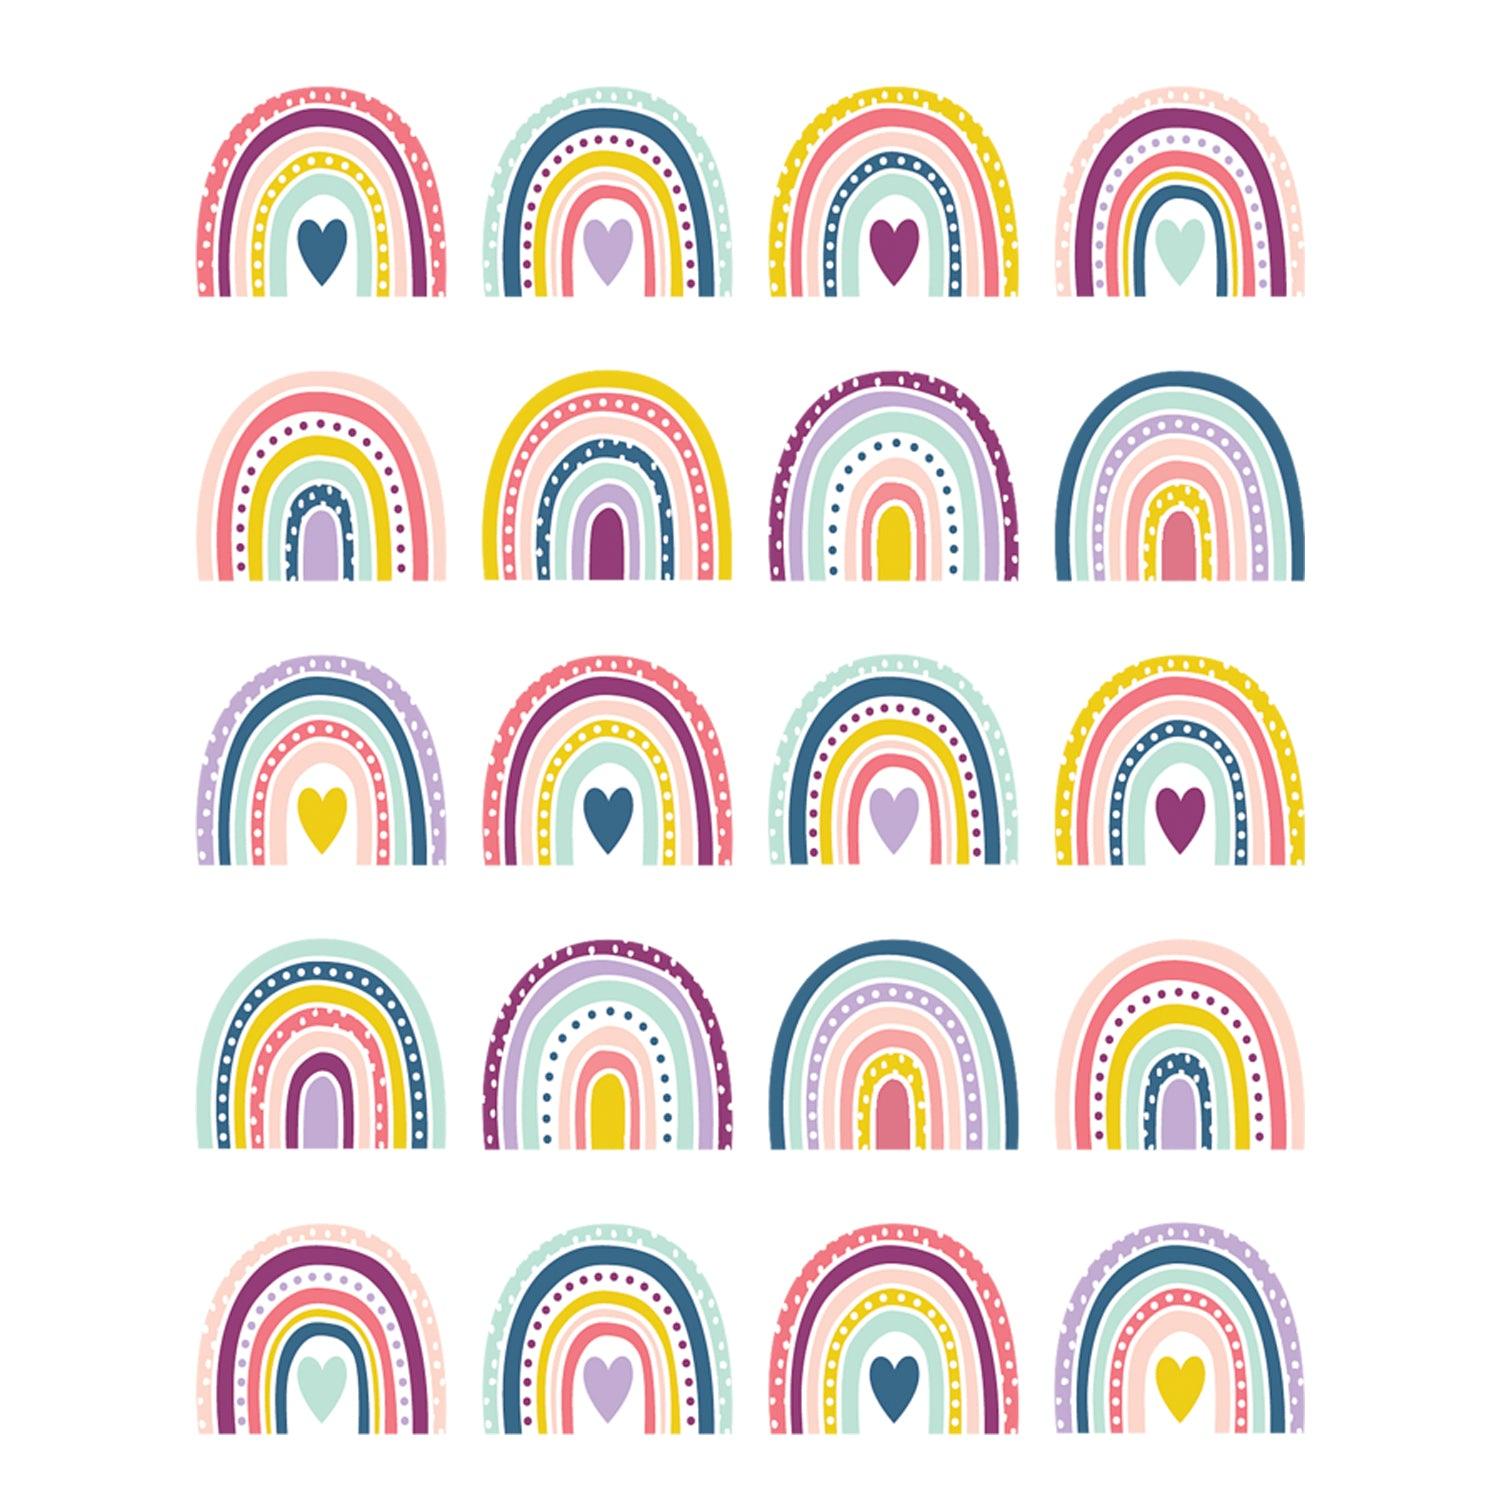 Oh Happy Day Rainbows Stickers, 12 Packs - Loomini